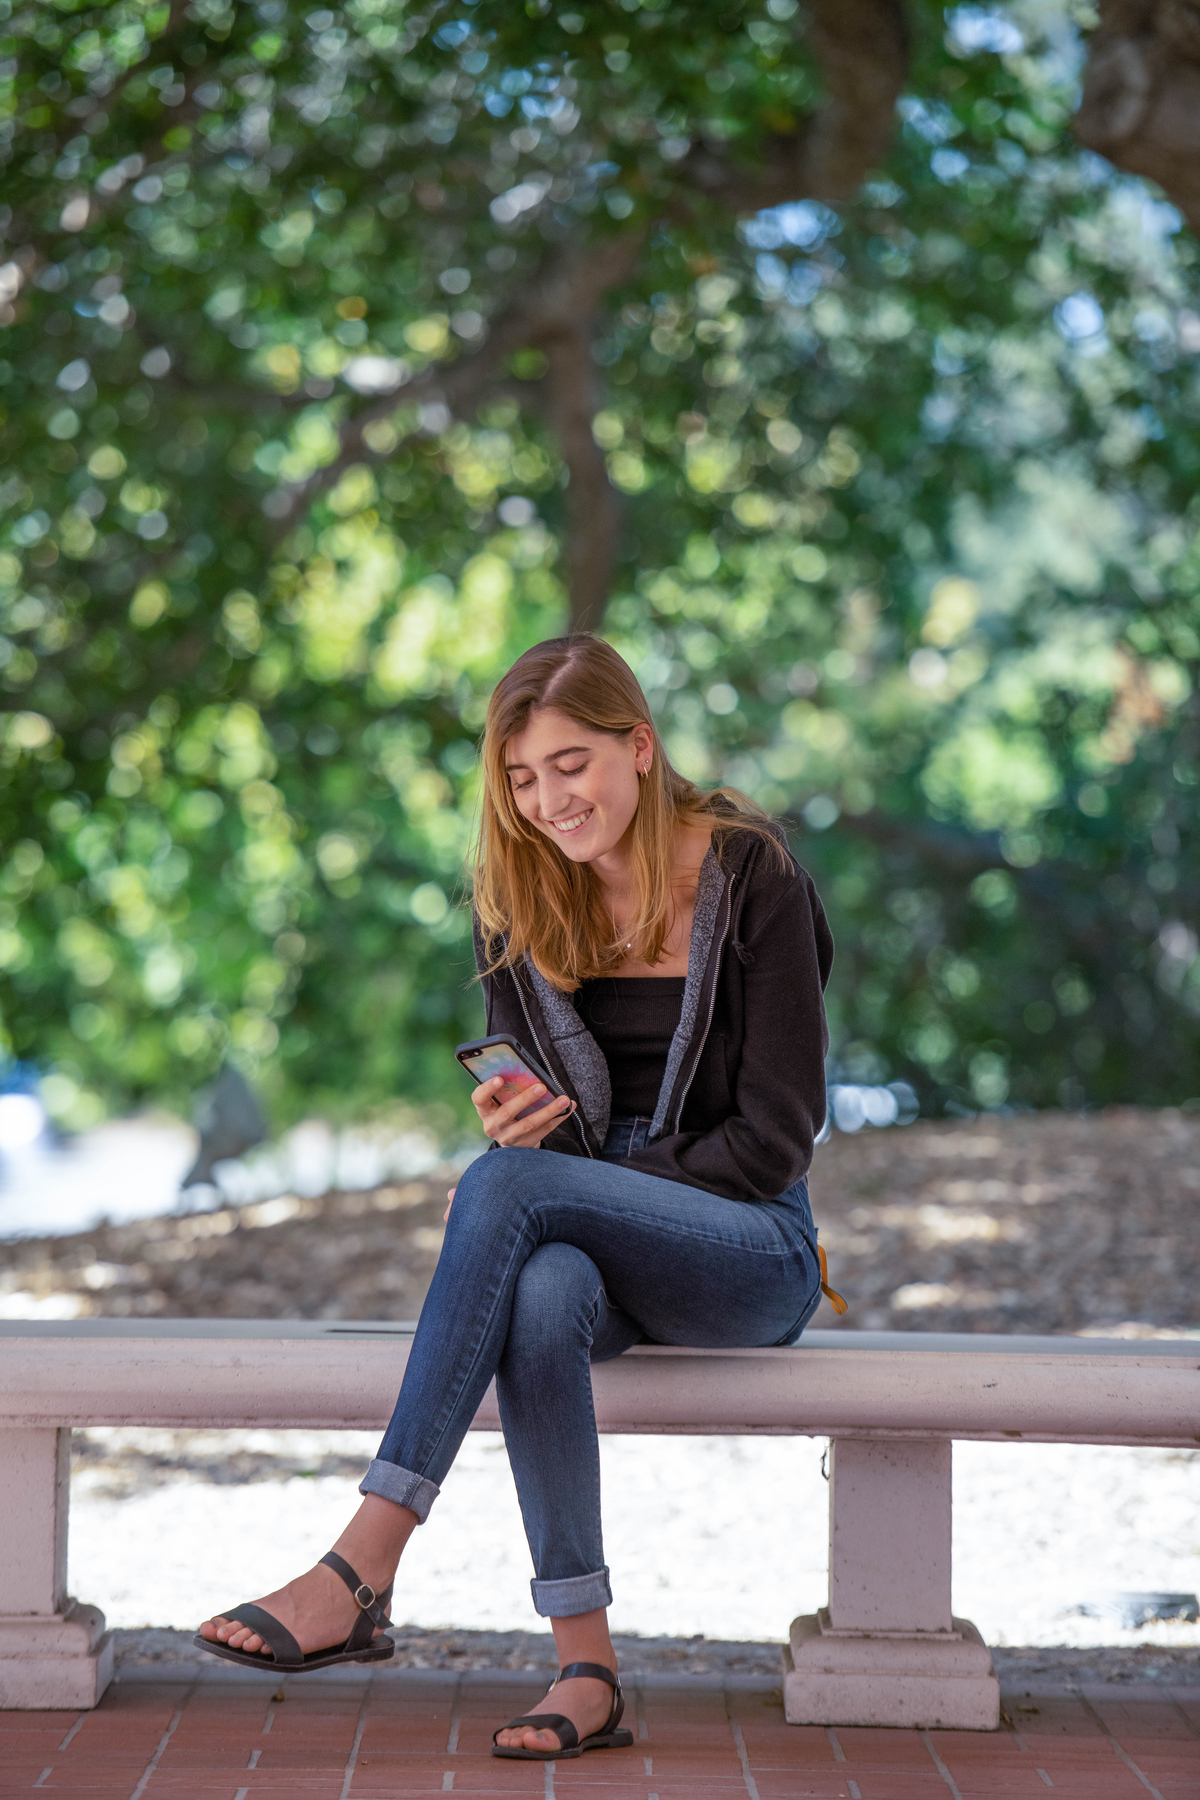 Student sitting with phone